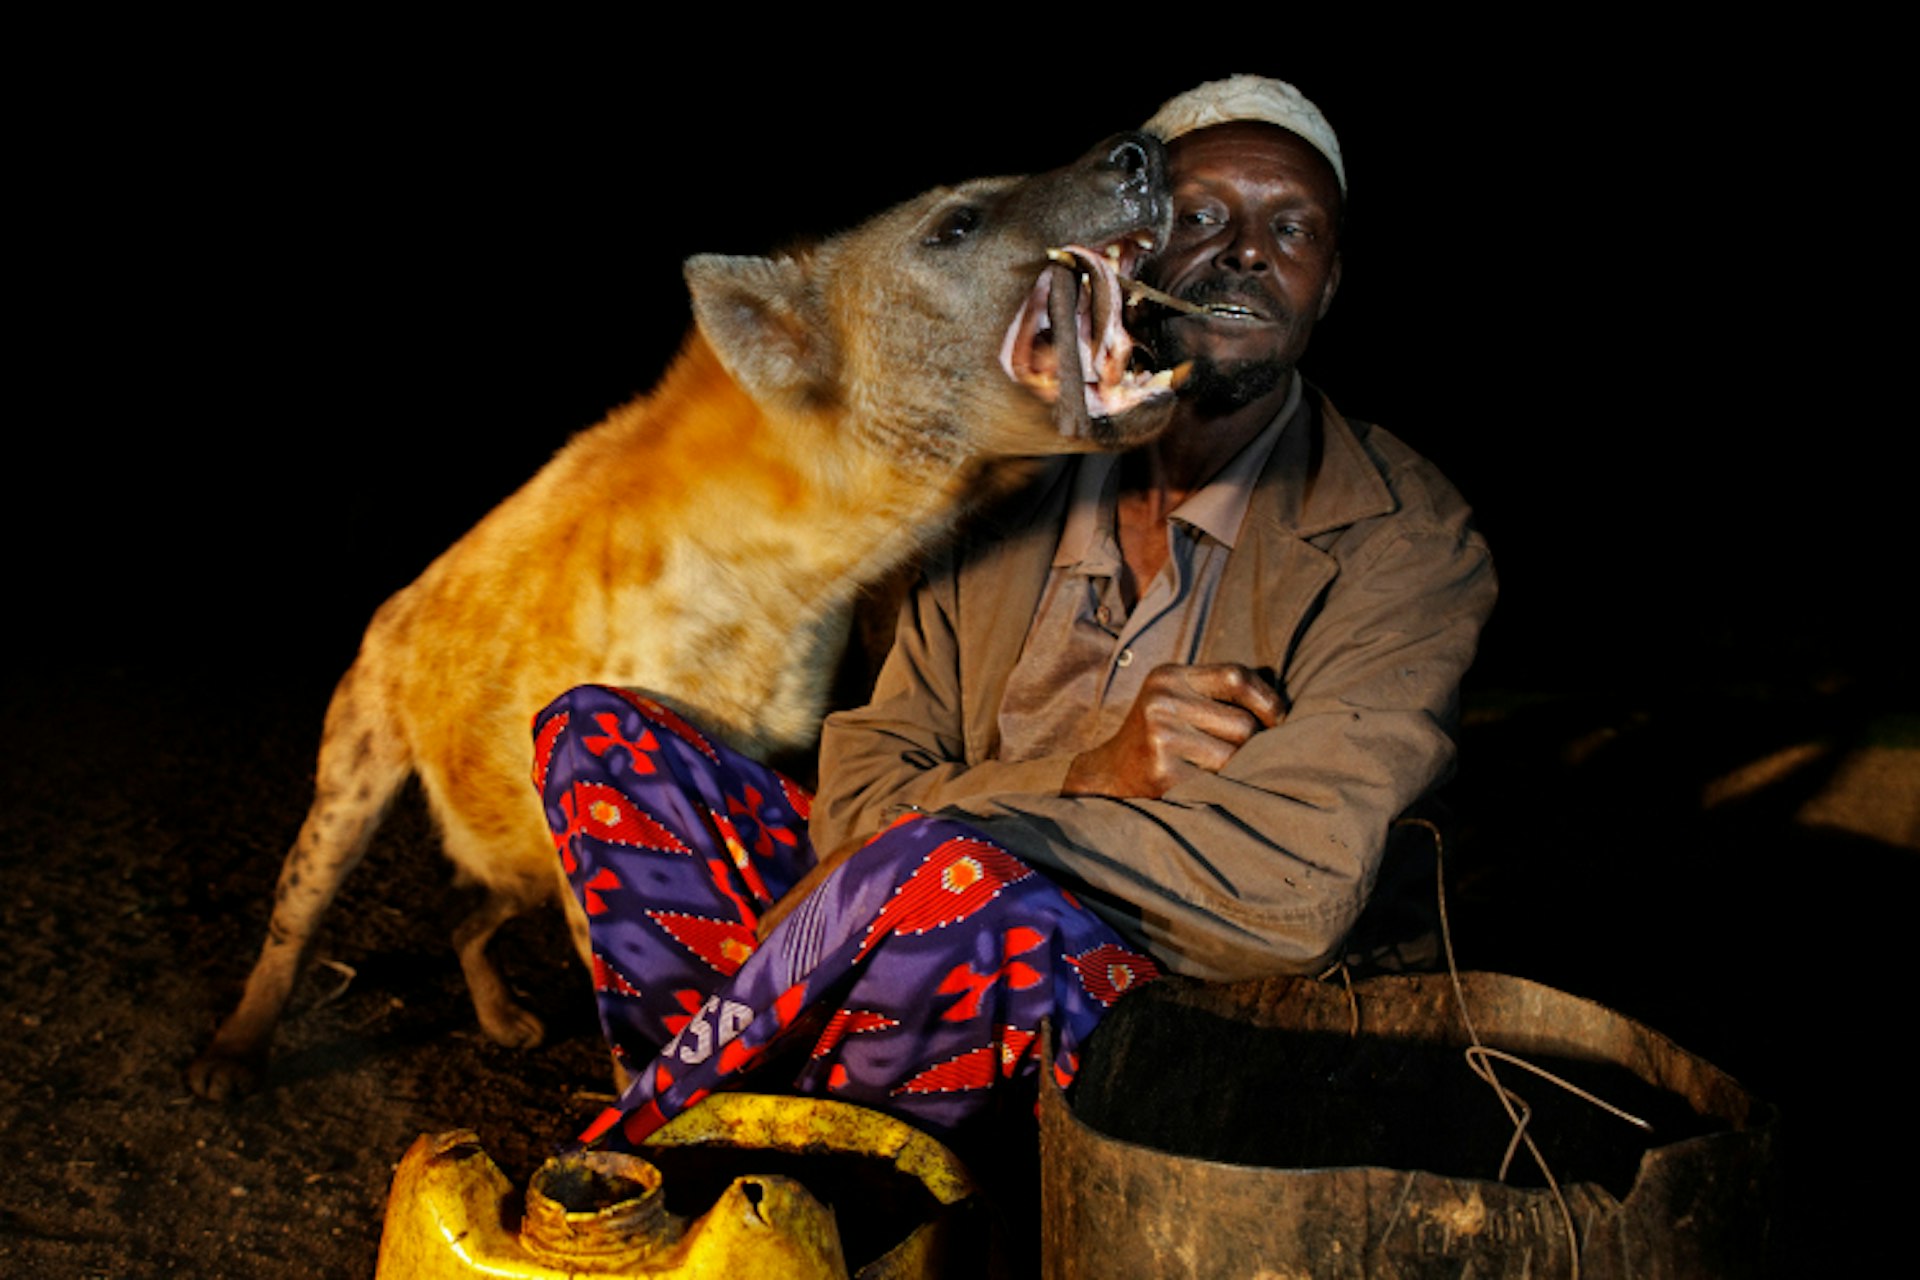 A man feeds a hyena in Harar with a stick straight from his mouth. Image by Johnny Haglund / Lonely Planet Images / Getty